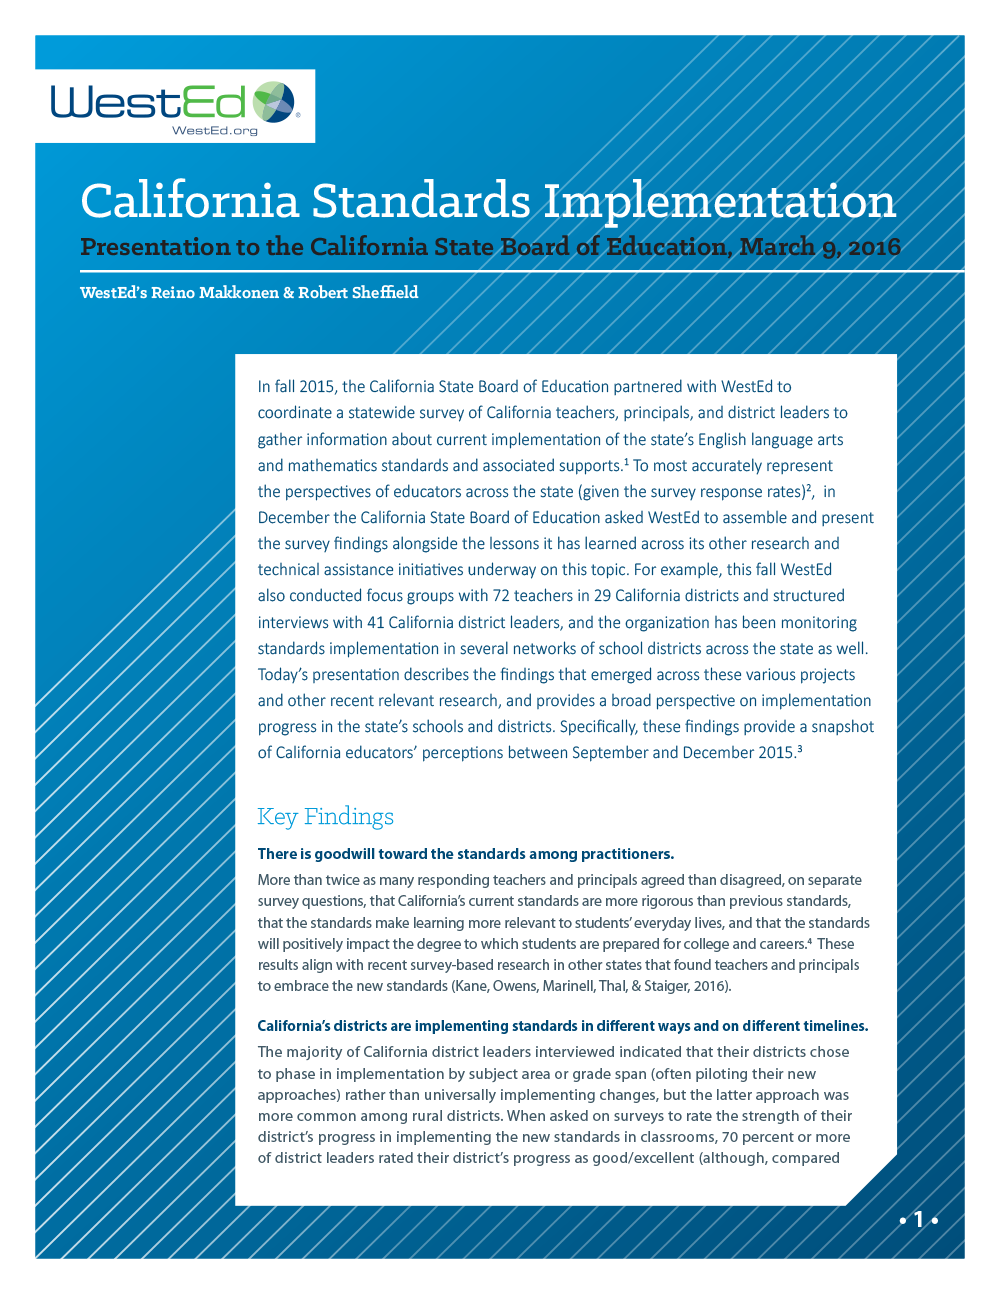 Cover Survey Results in Brief: WestEd Presentation to the California State Board of Education (March 2016)